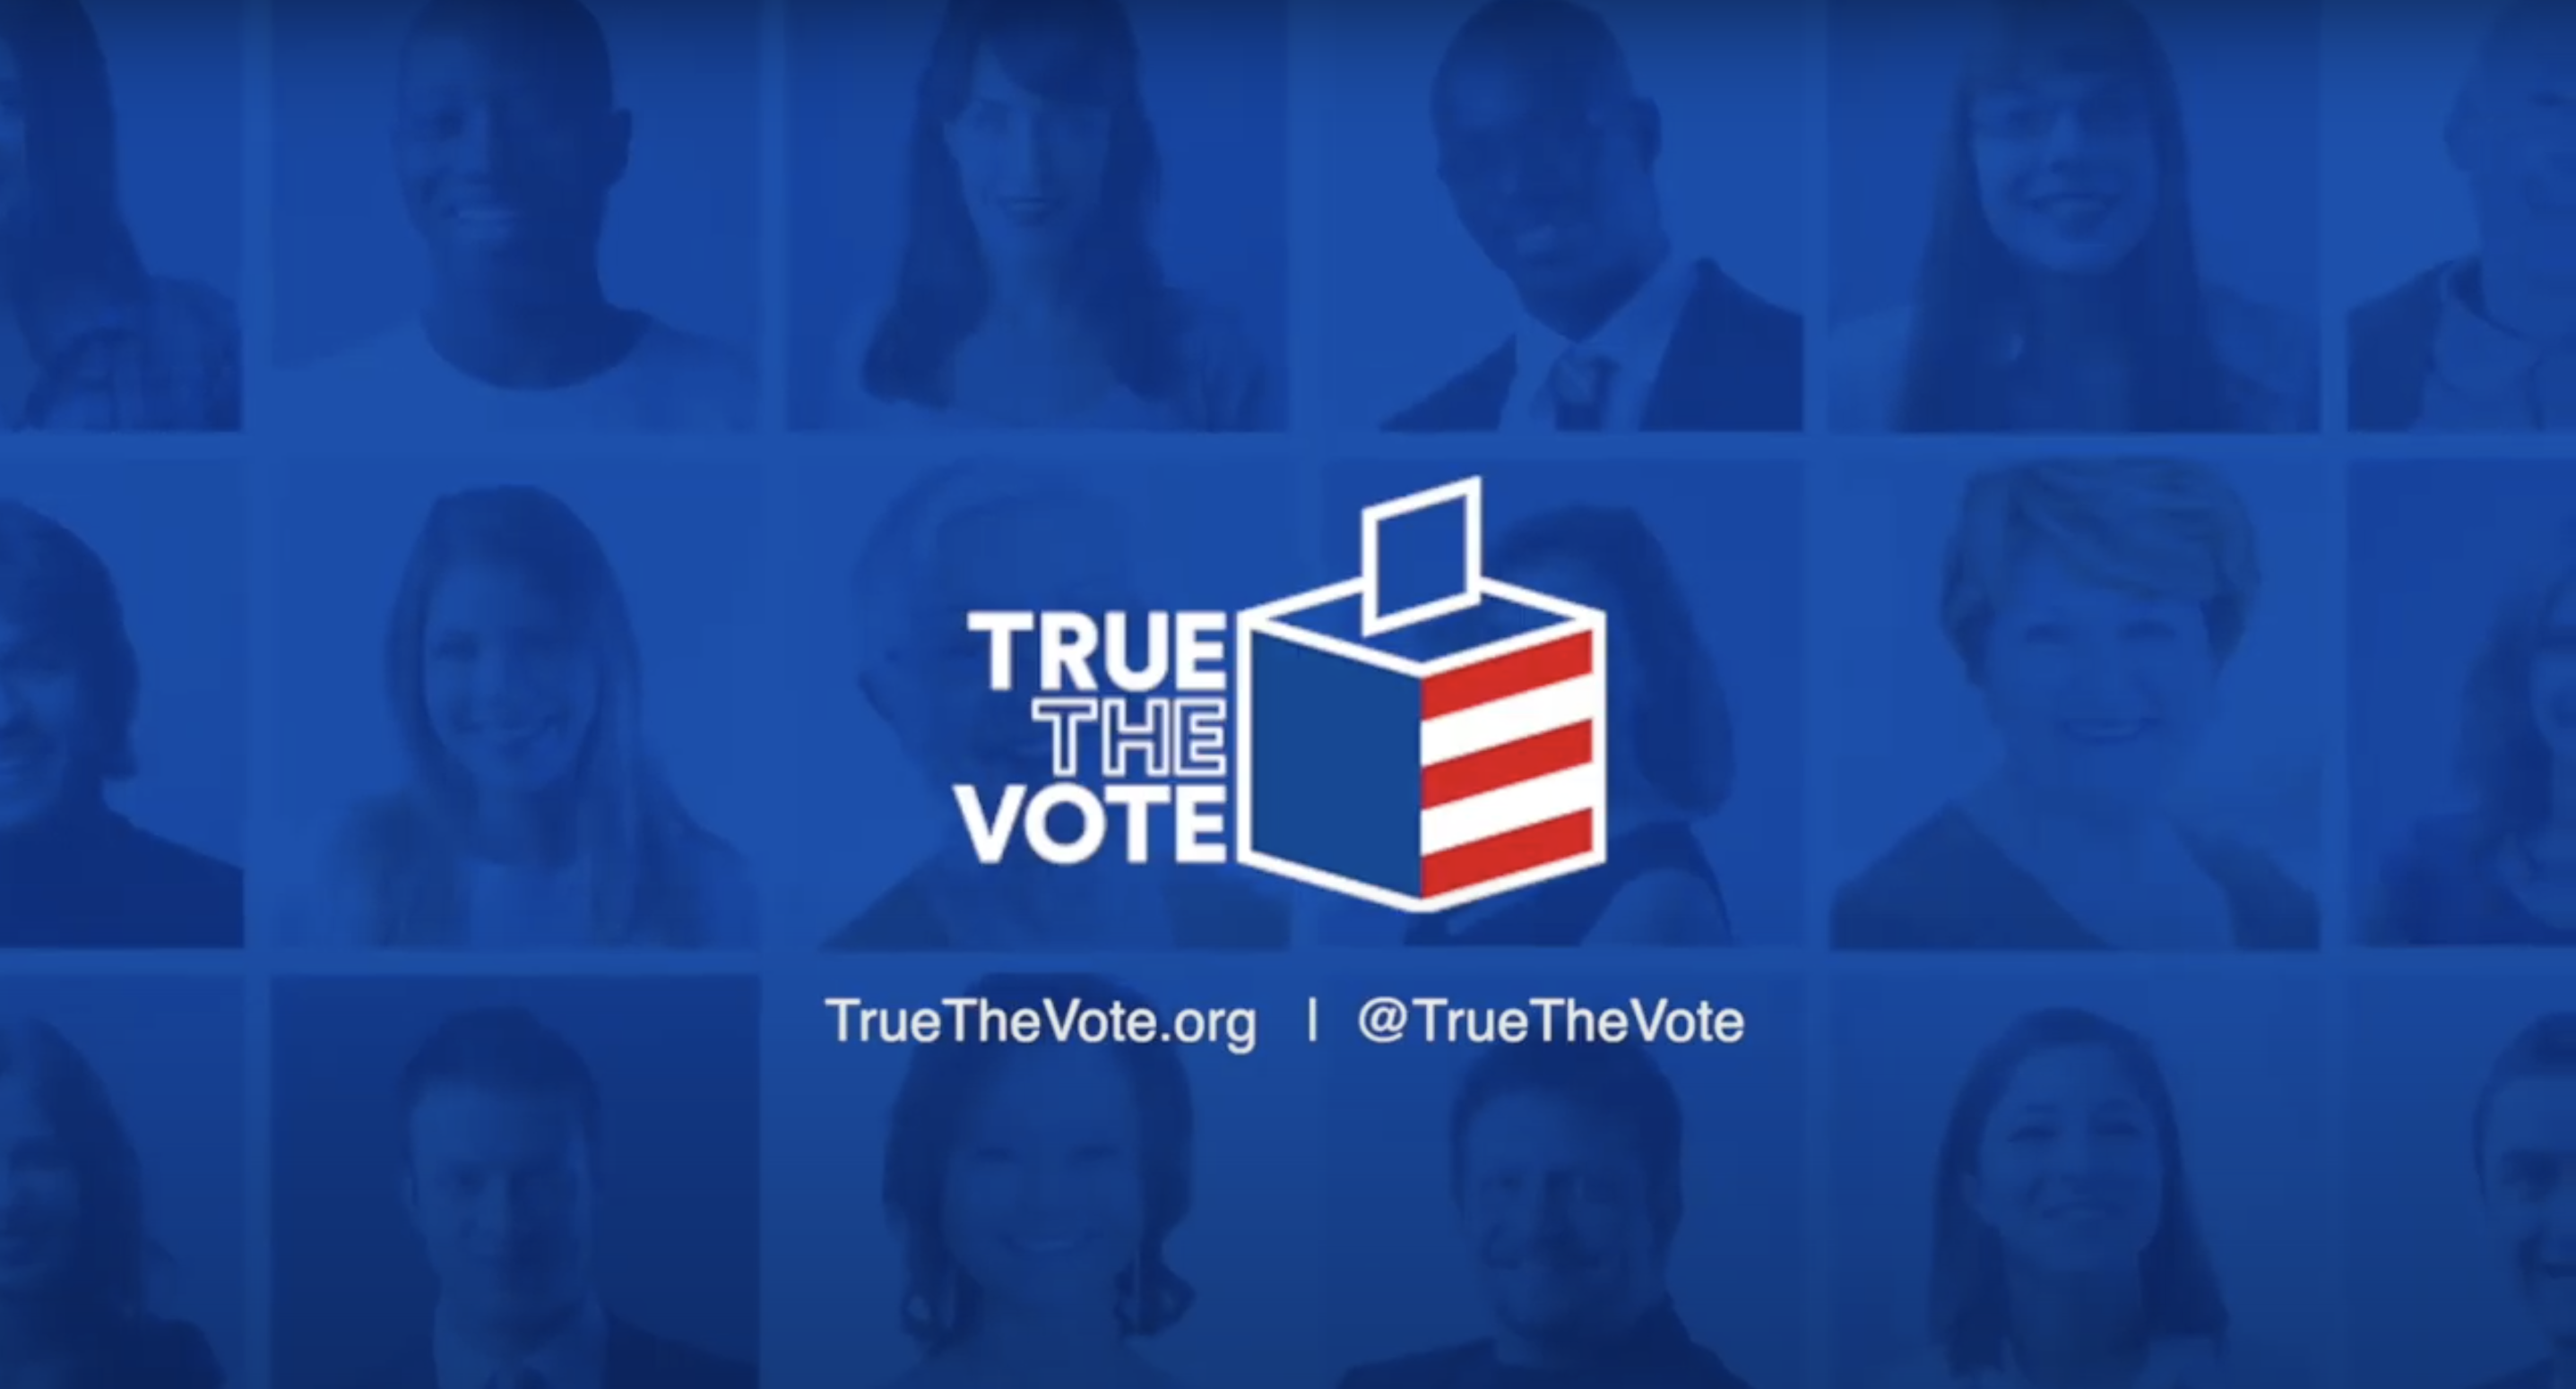 True the Vote Fights for Voter Protection